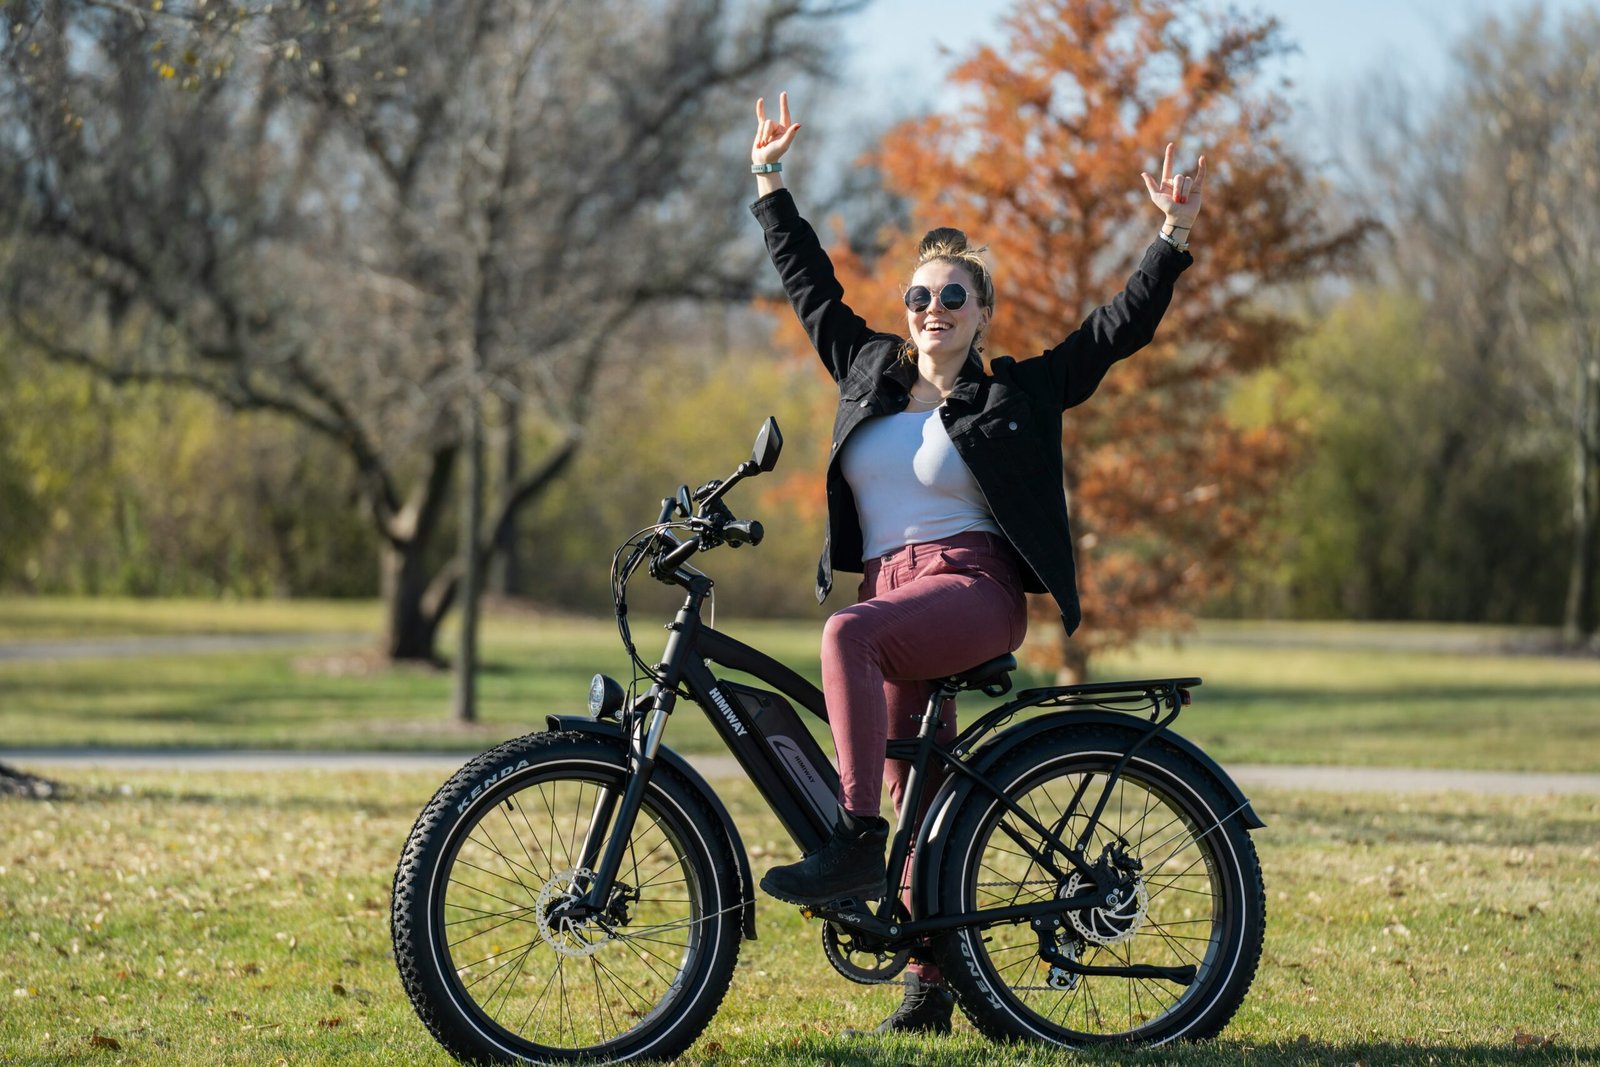 How to Choose the Perfect E-bike for You – Things to Consider Before Buying an ebike